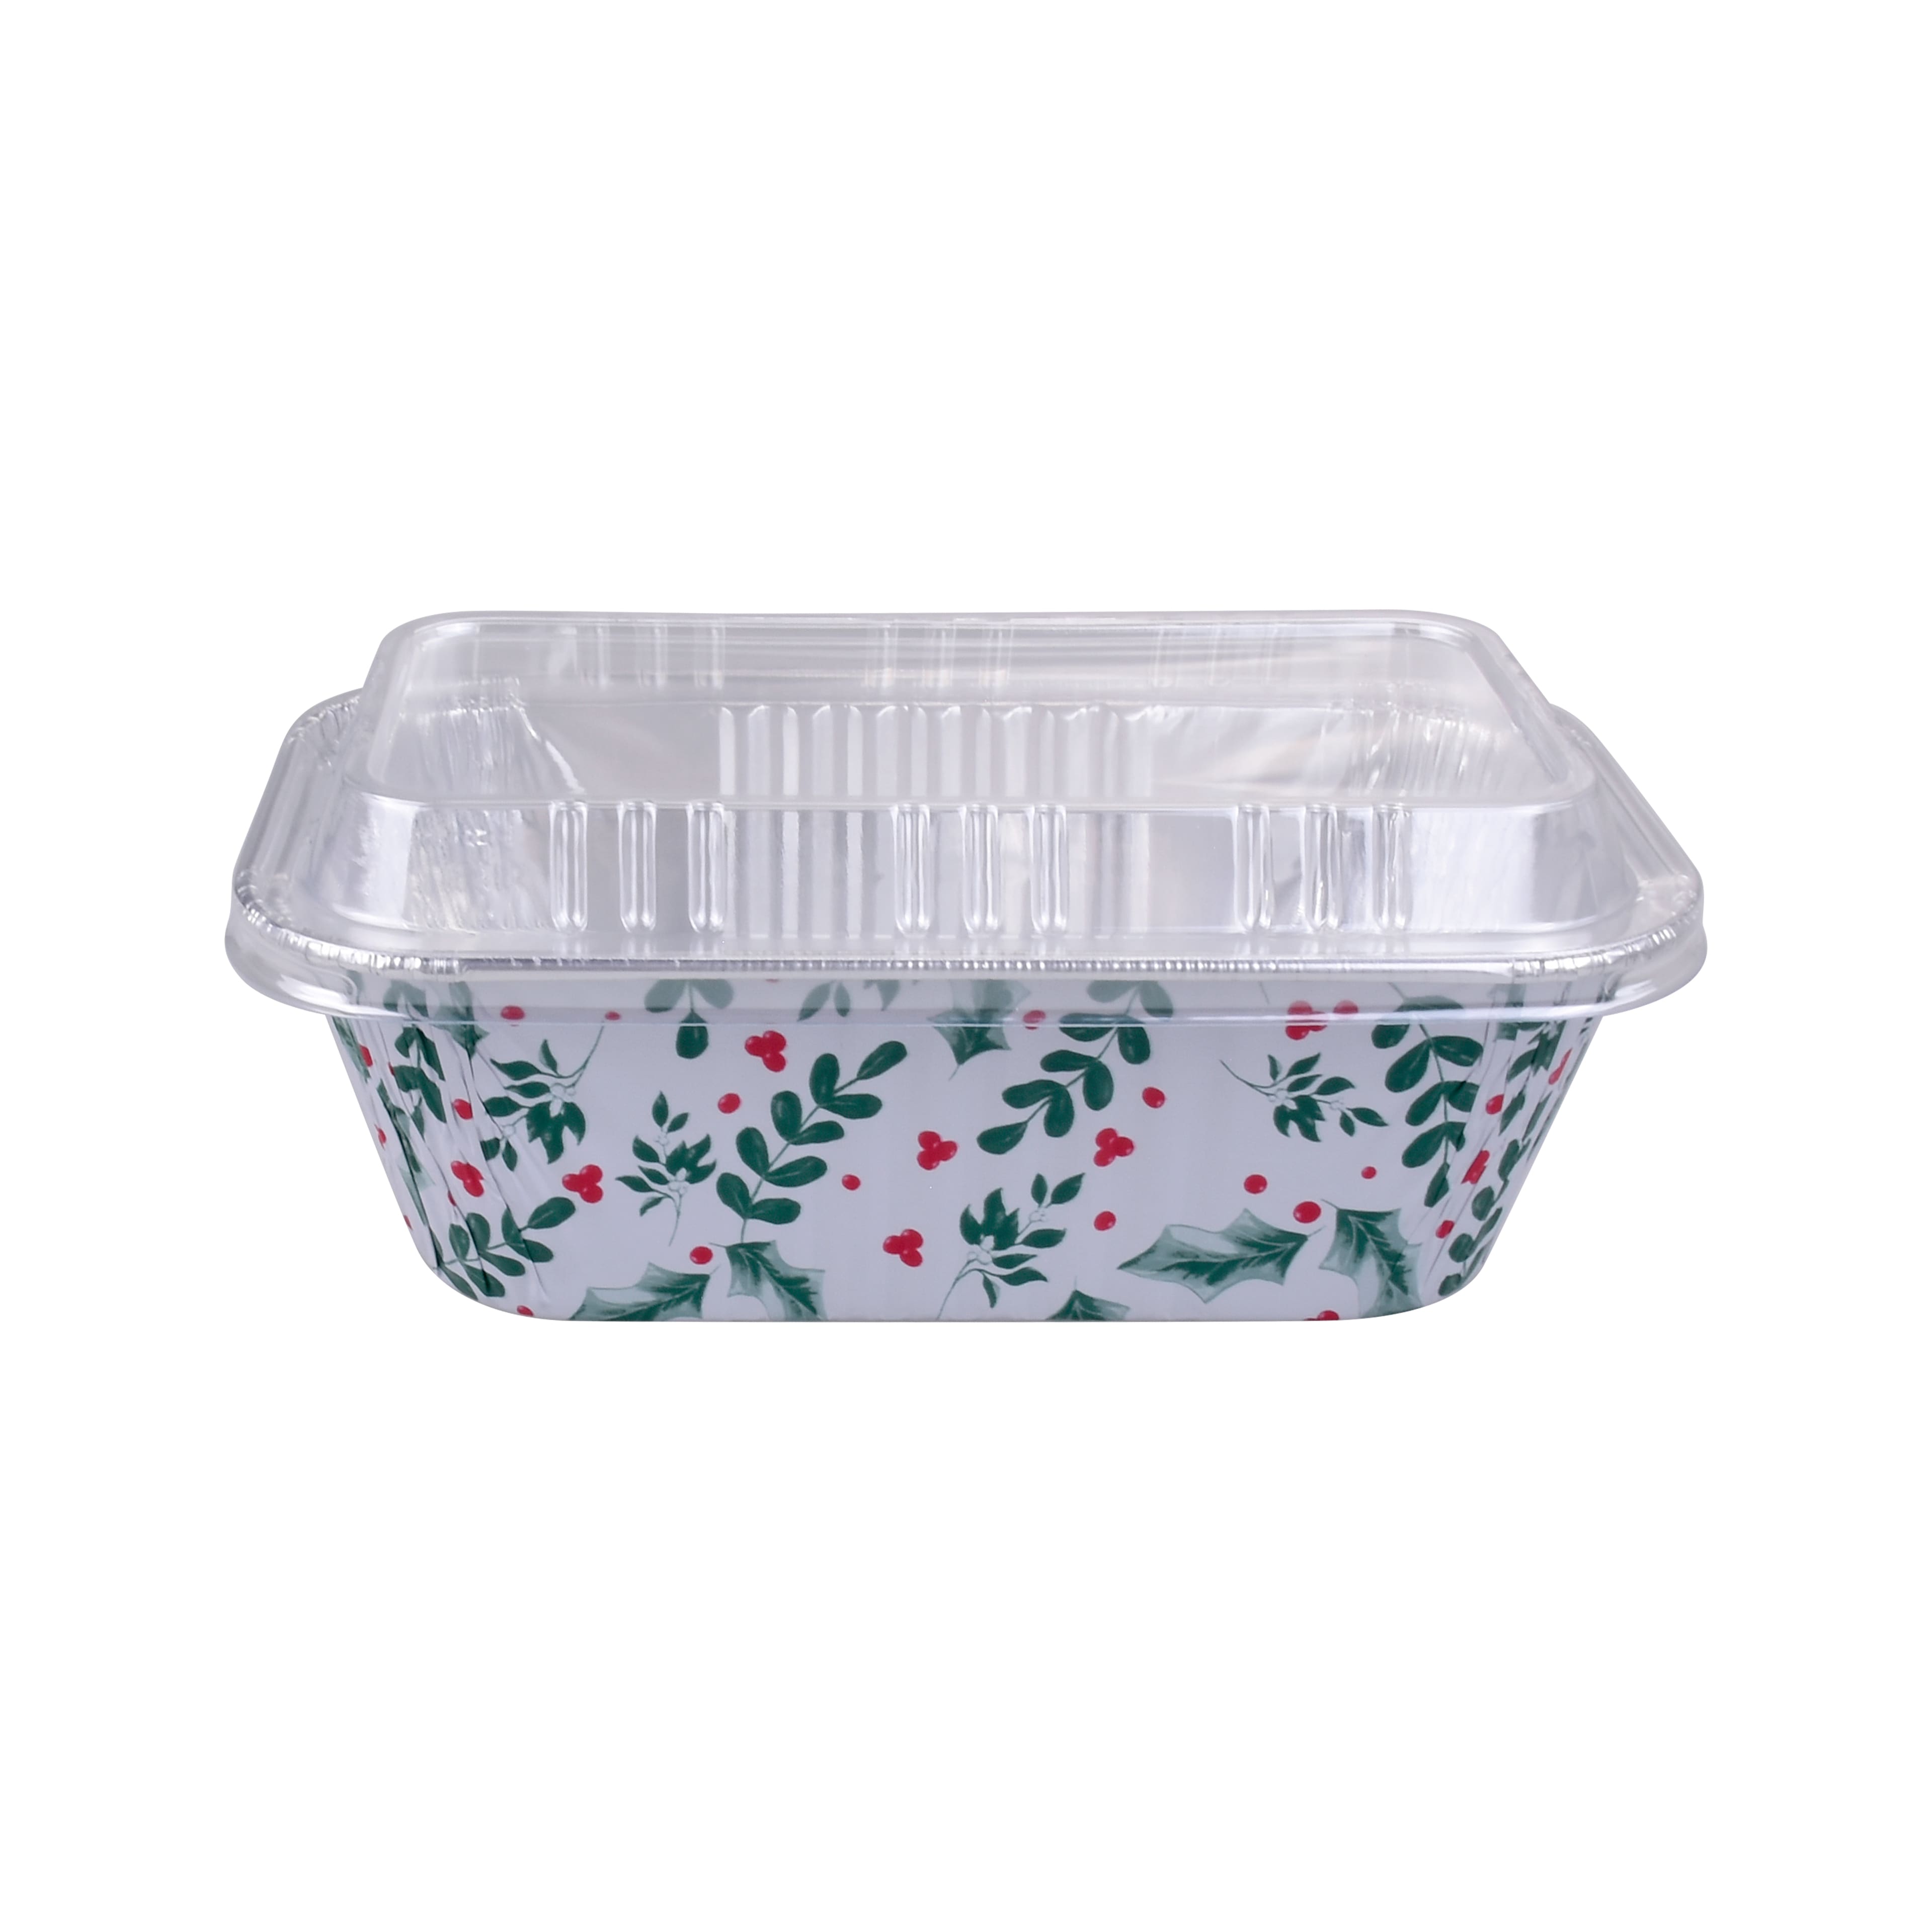 6 Christmas Holiday Holly Disposable Aluminum Baking Pans by